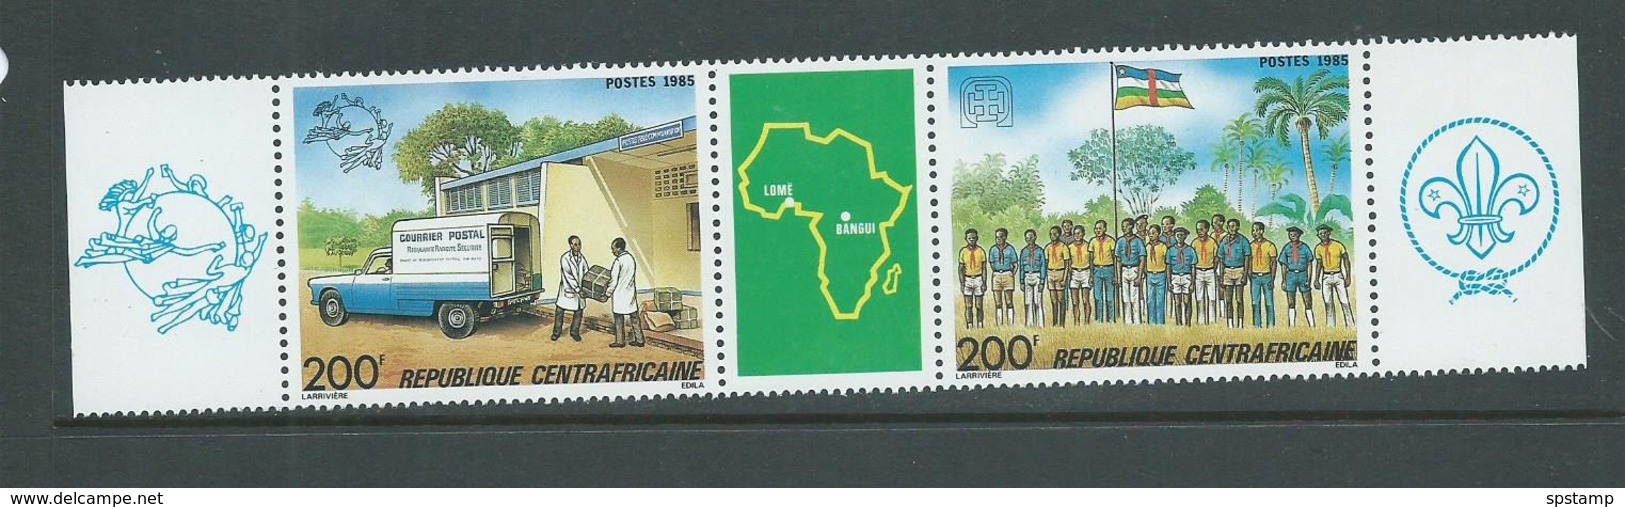 Central African Republic 1985 Philex Africa Scout & Postal Service Strip With Label MNH - Central African Republic